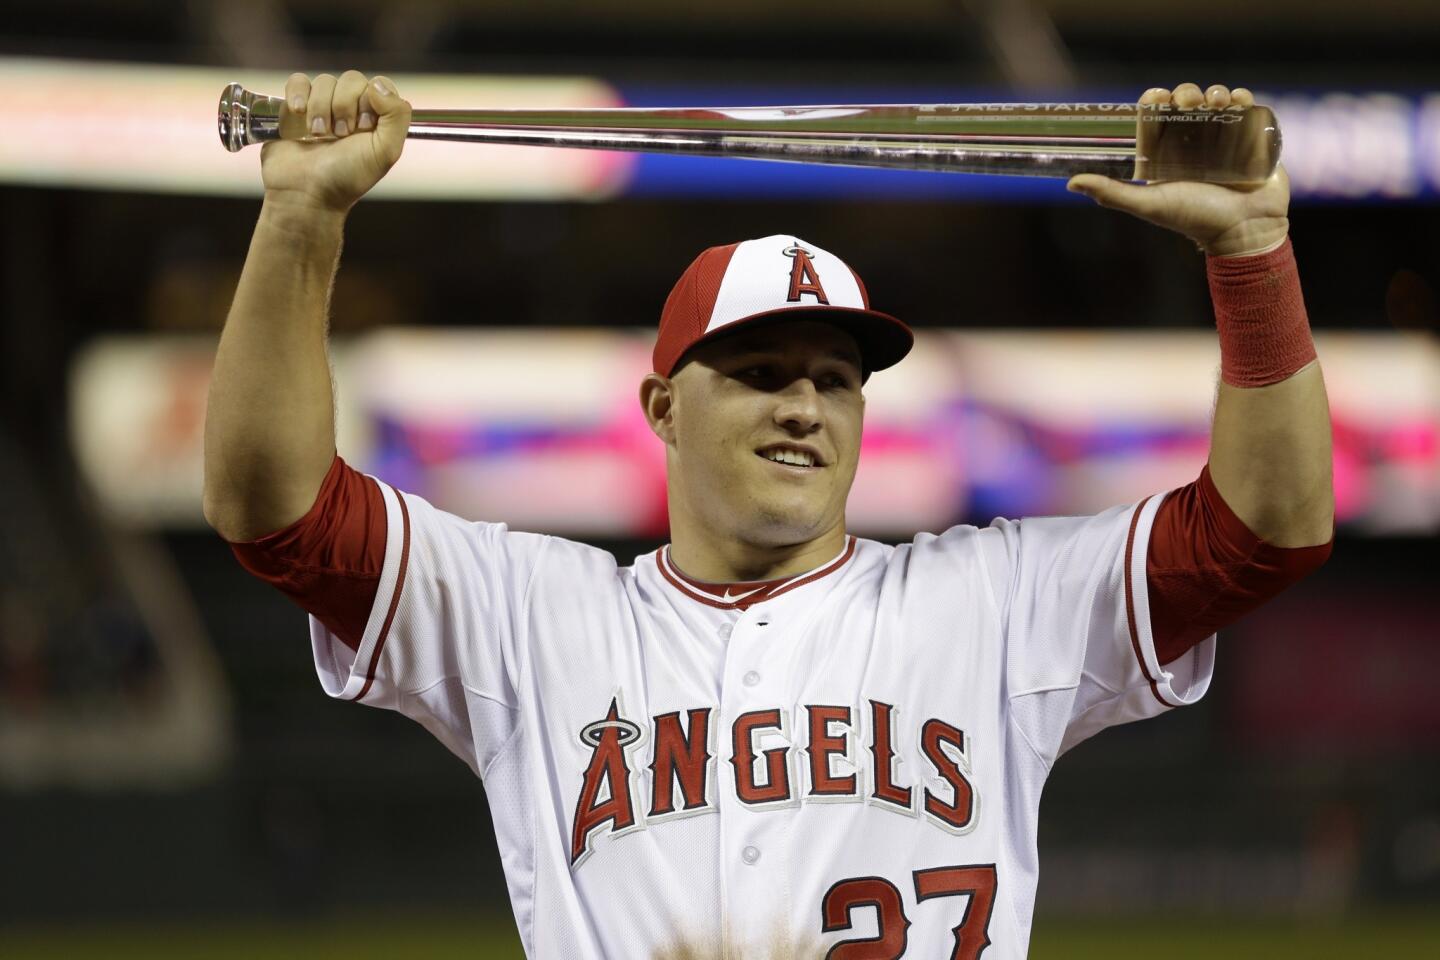 Mike Trout Wins The All-Star MVP Again And Gets Another Awesome Car